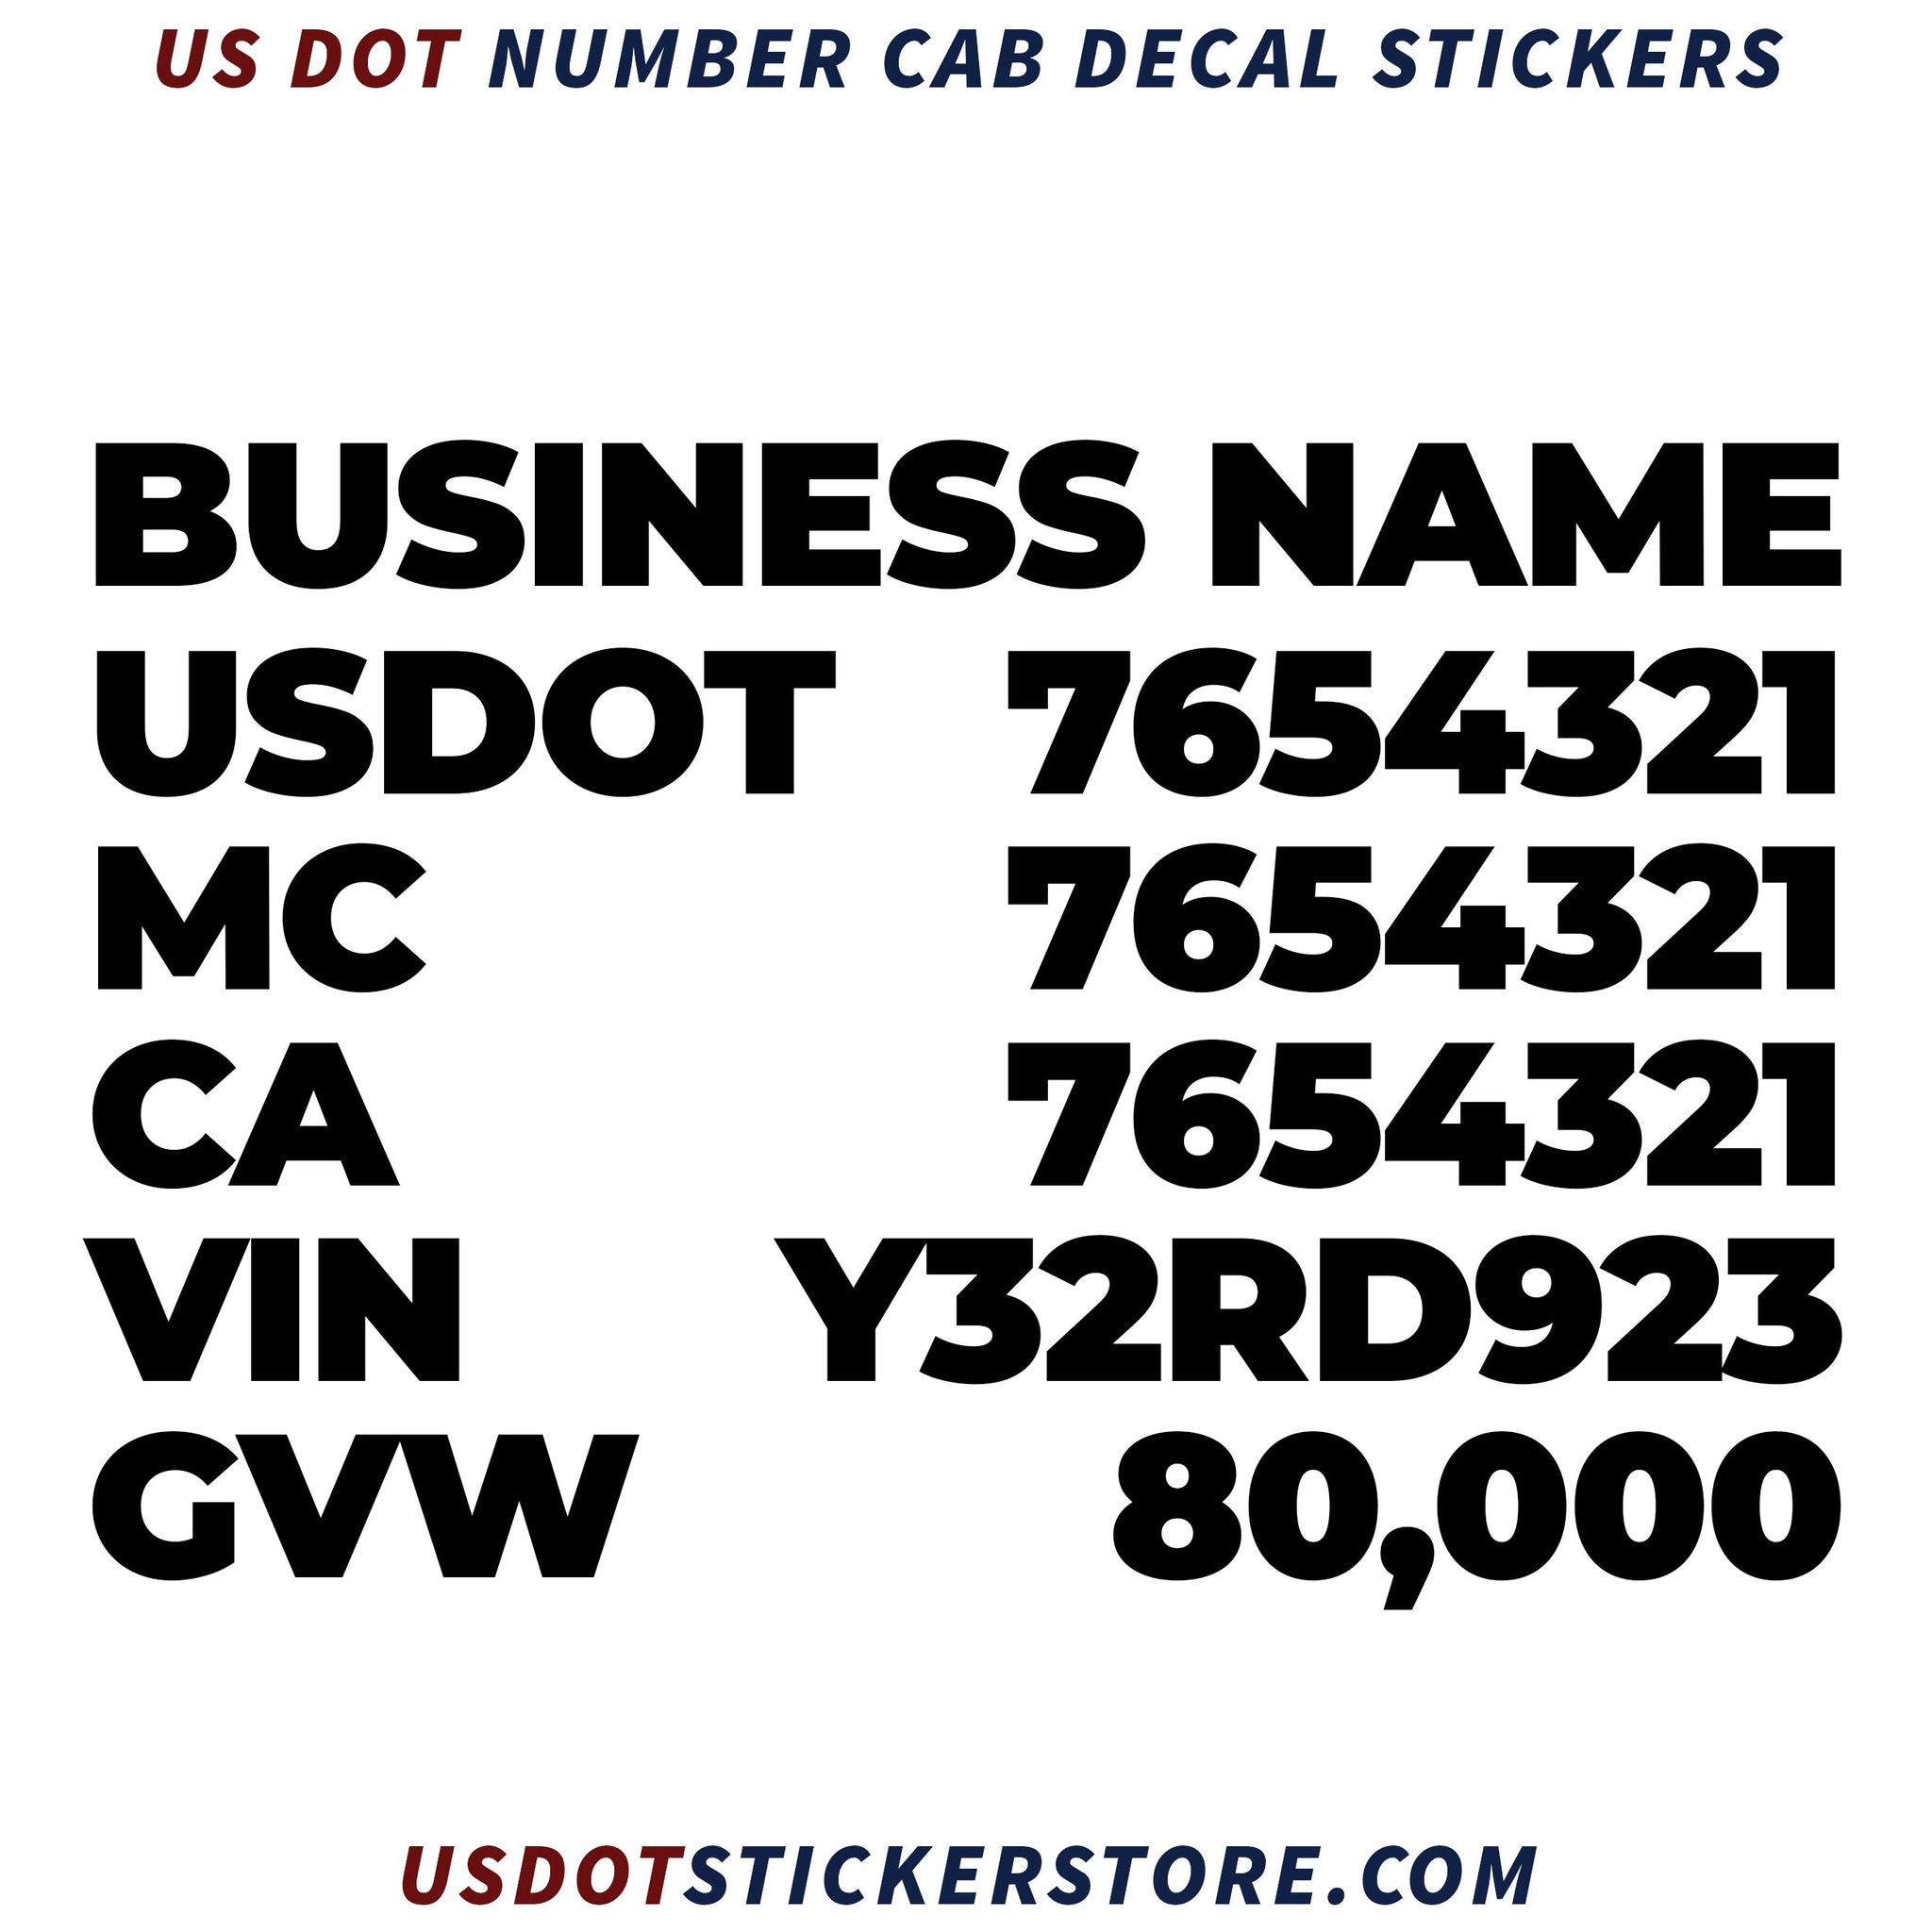 business name, usdot, mc, ca, vin & gvw number decal sticker